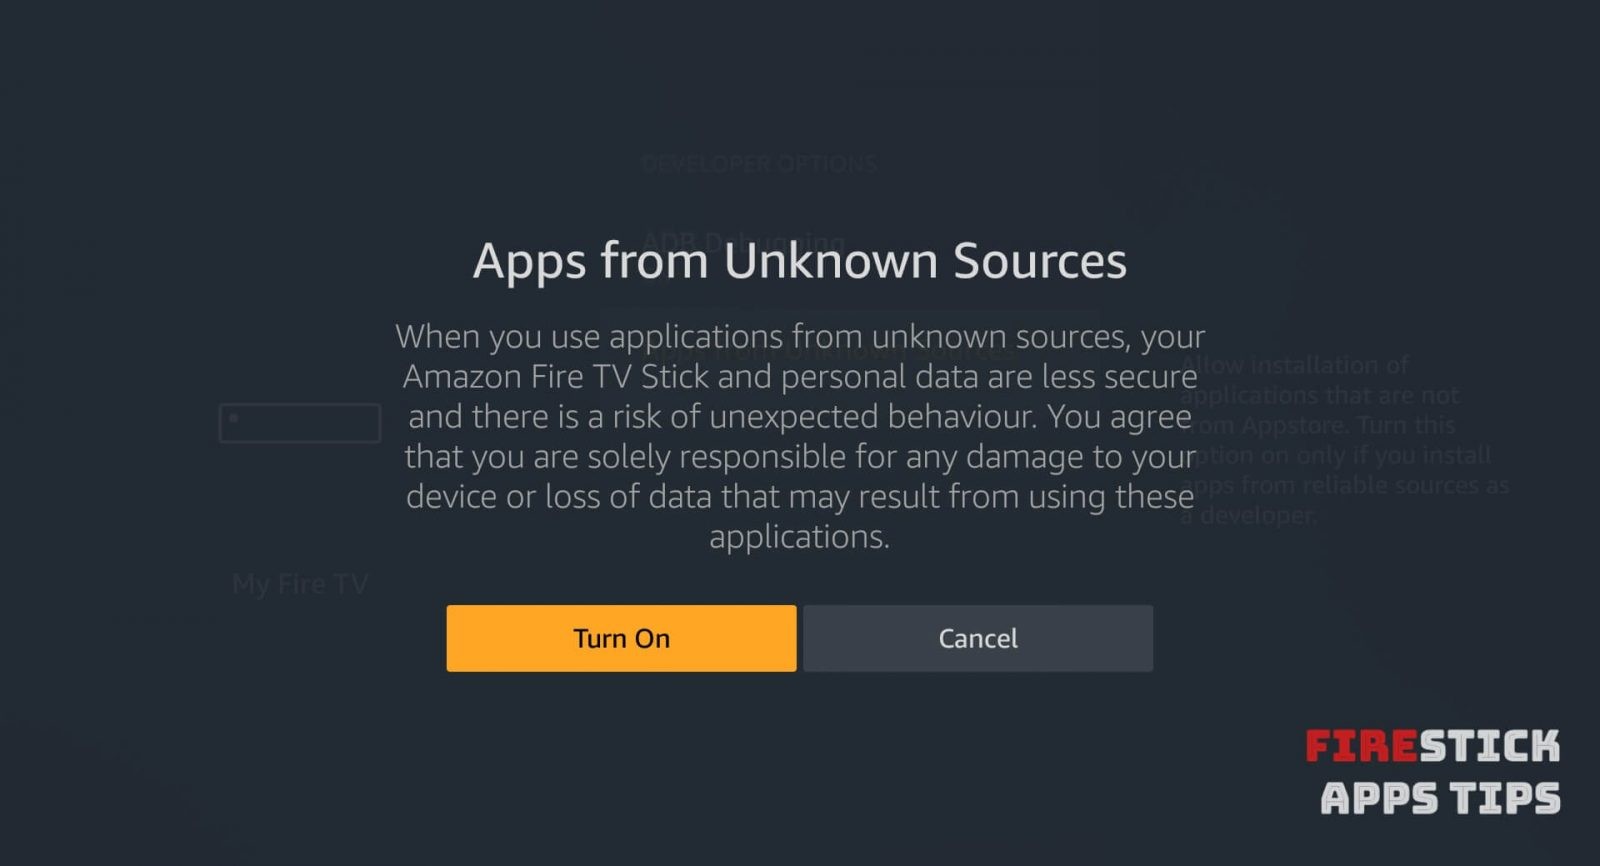 enable apps from unknown sources